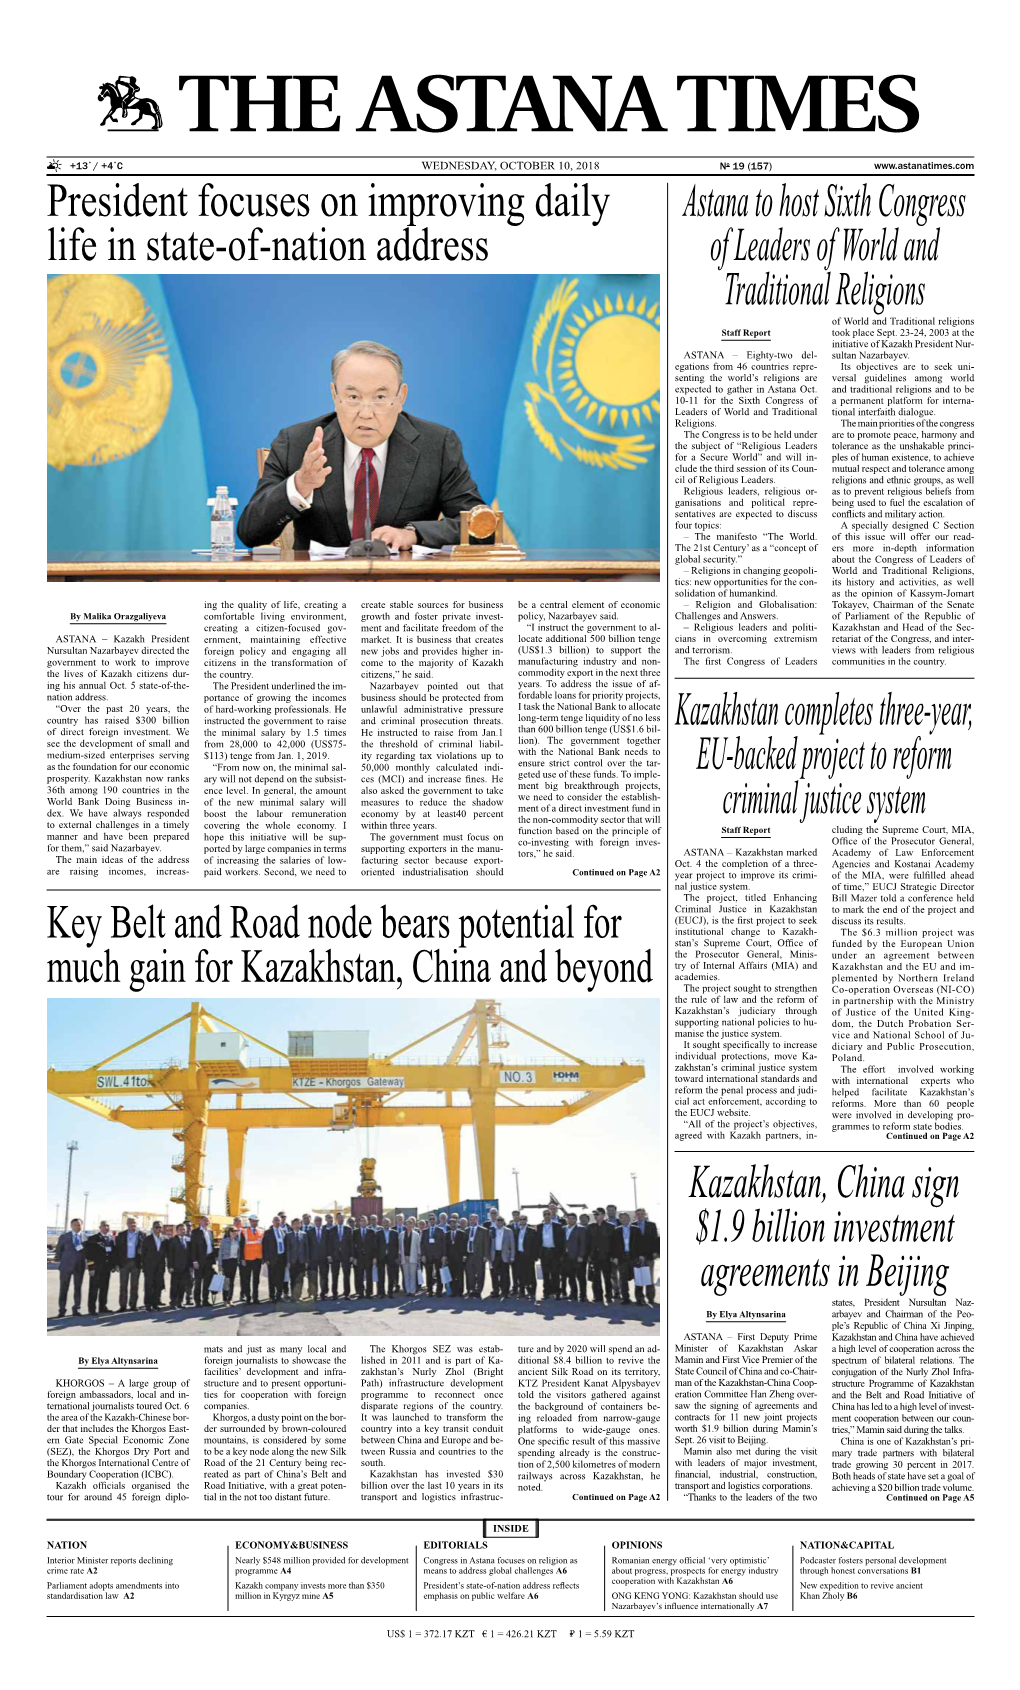 Kazakhstan Completes Three-Year, EU-Backed Project to Reform